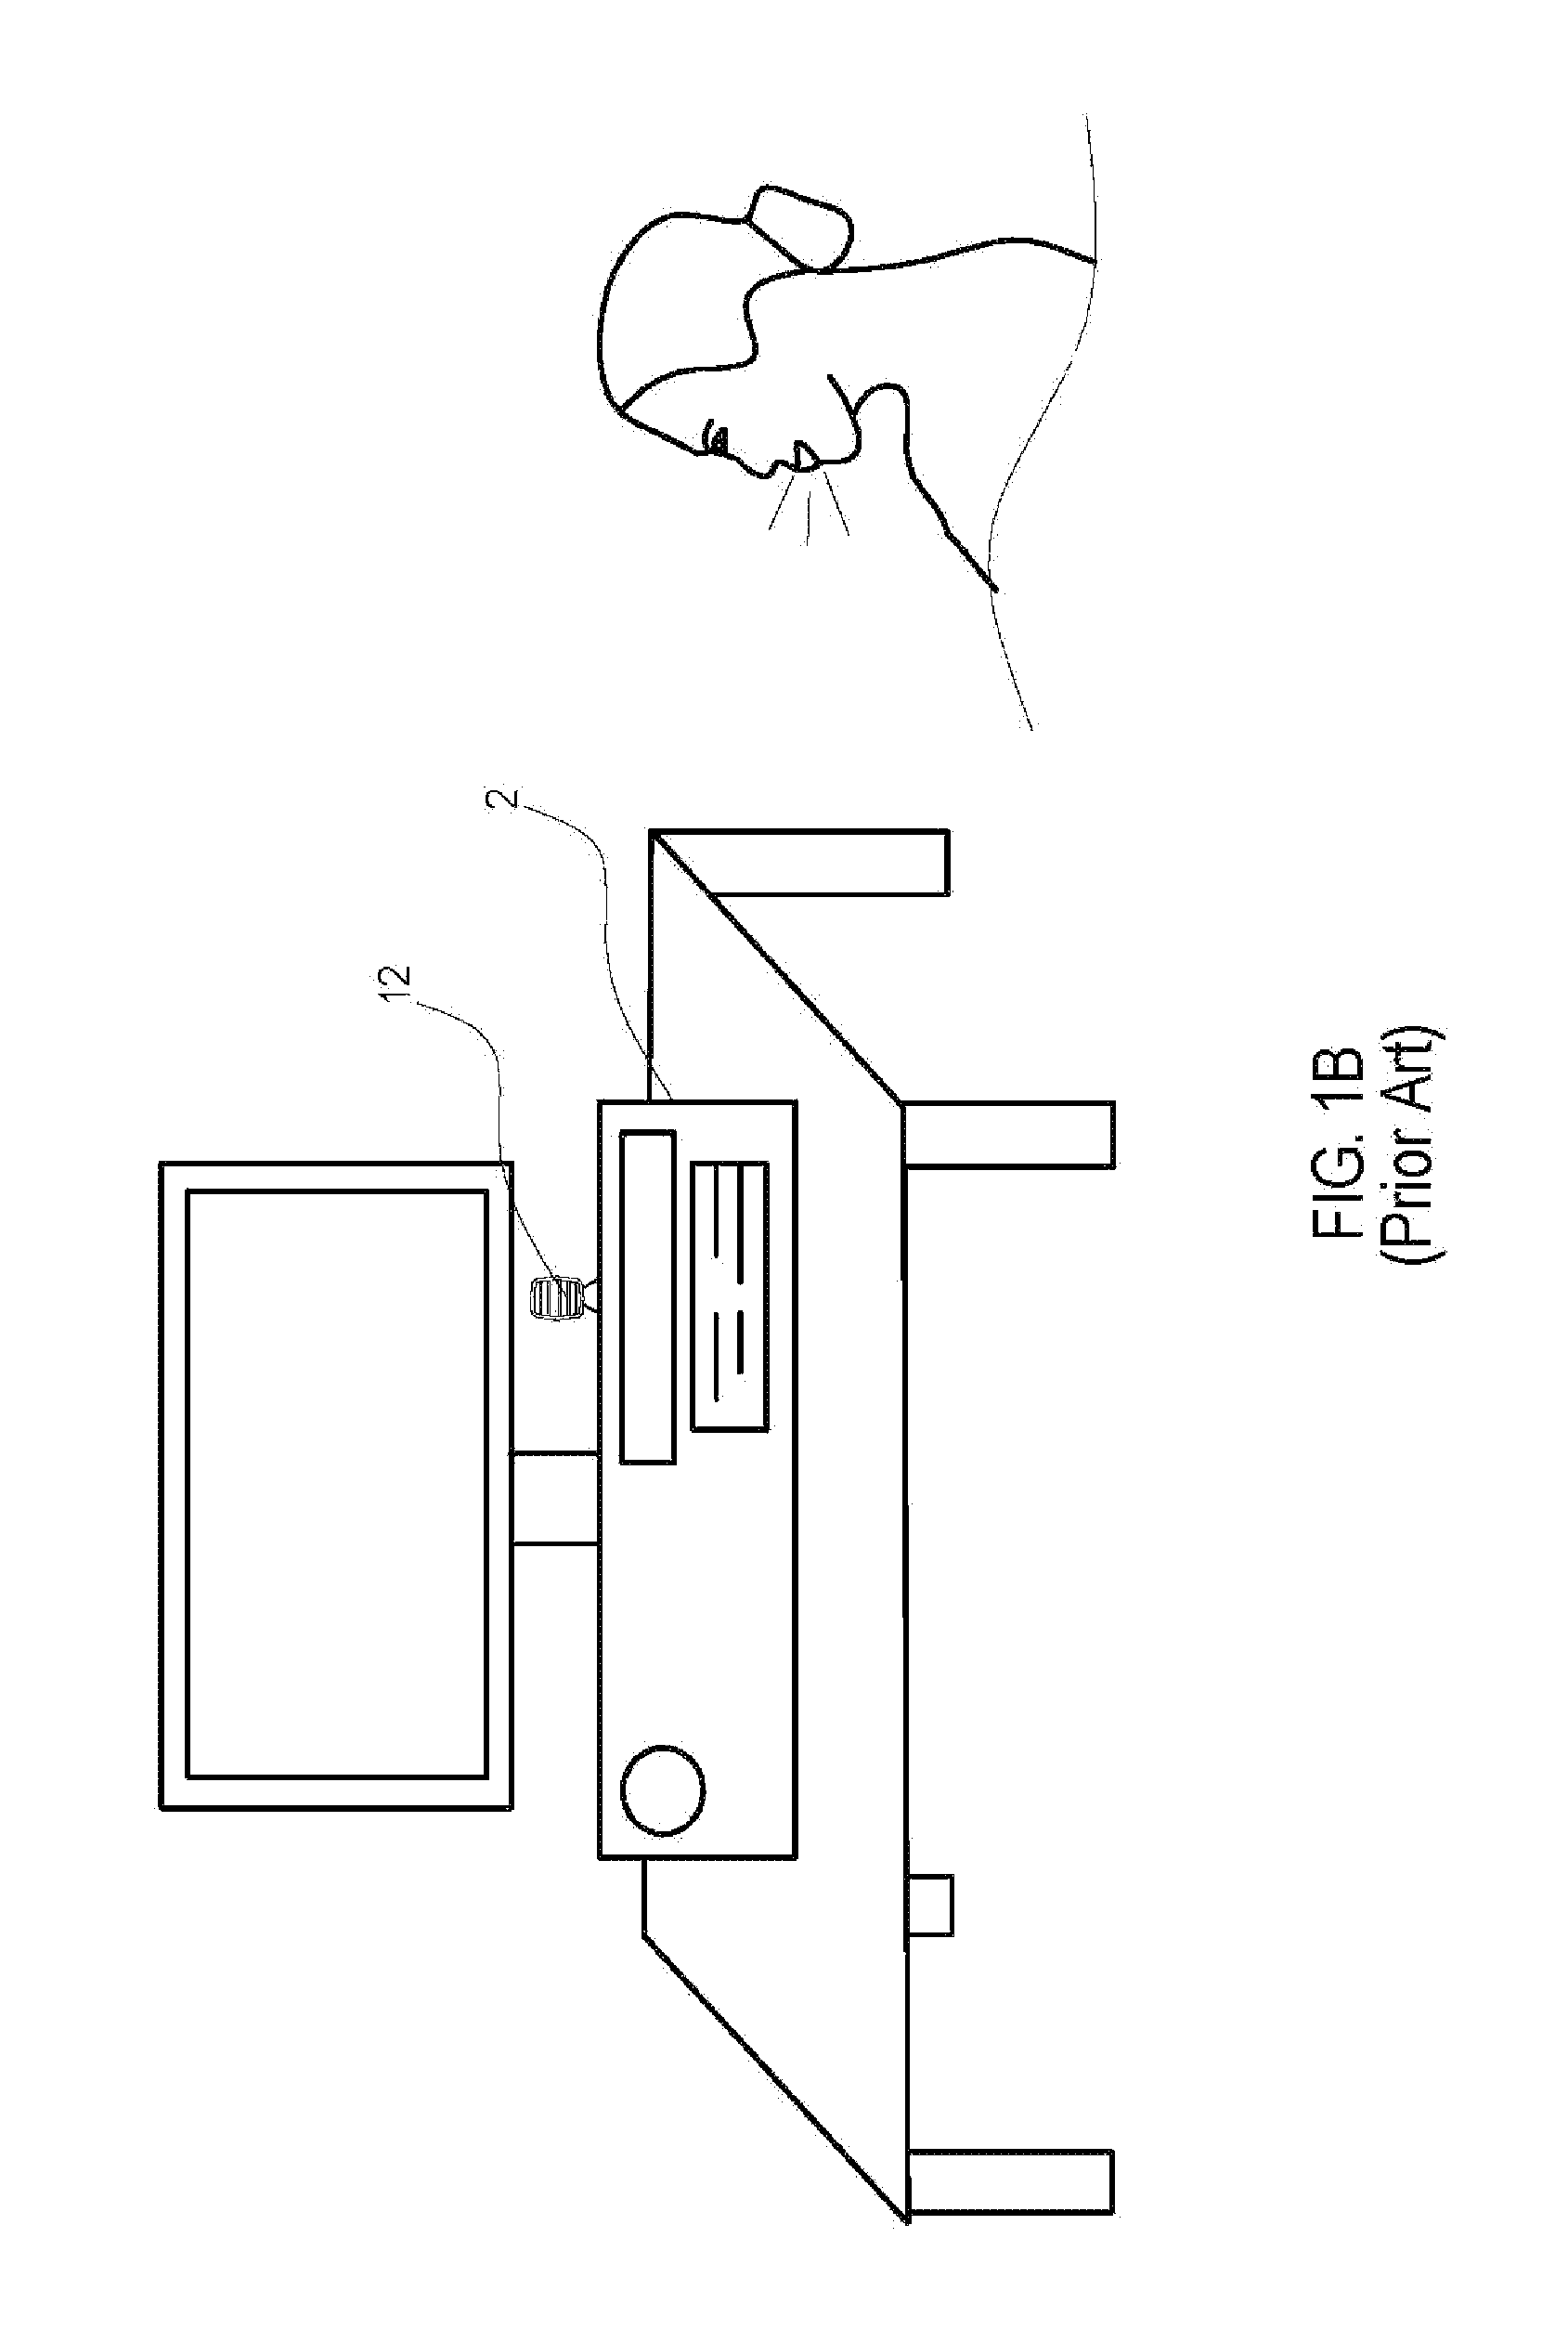 Behavior recognition system and method by combining image and speech